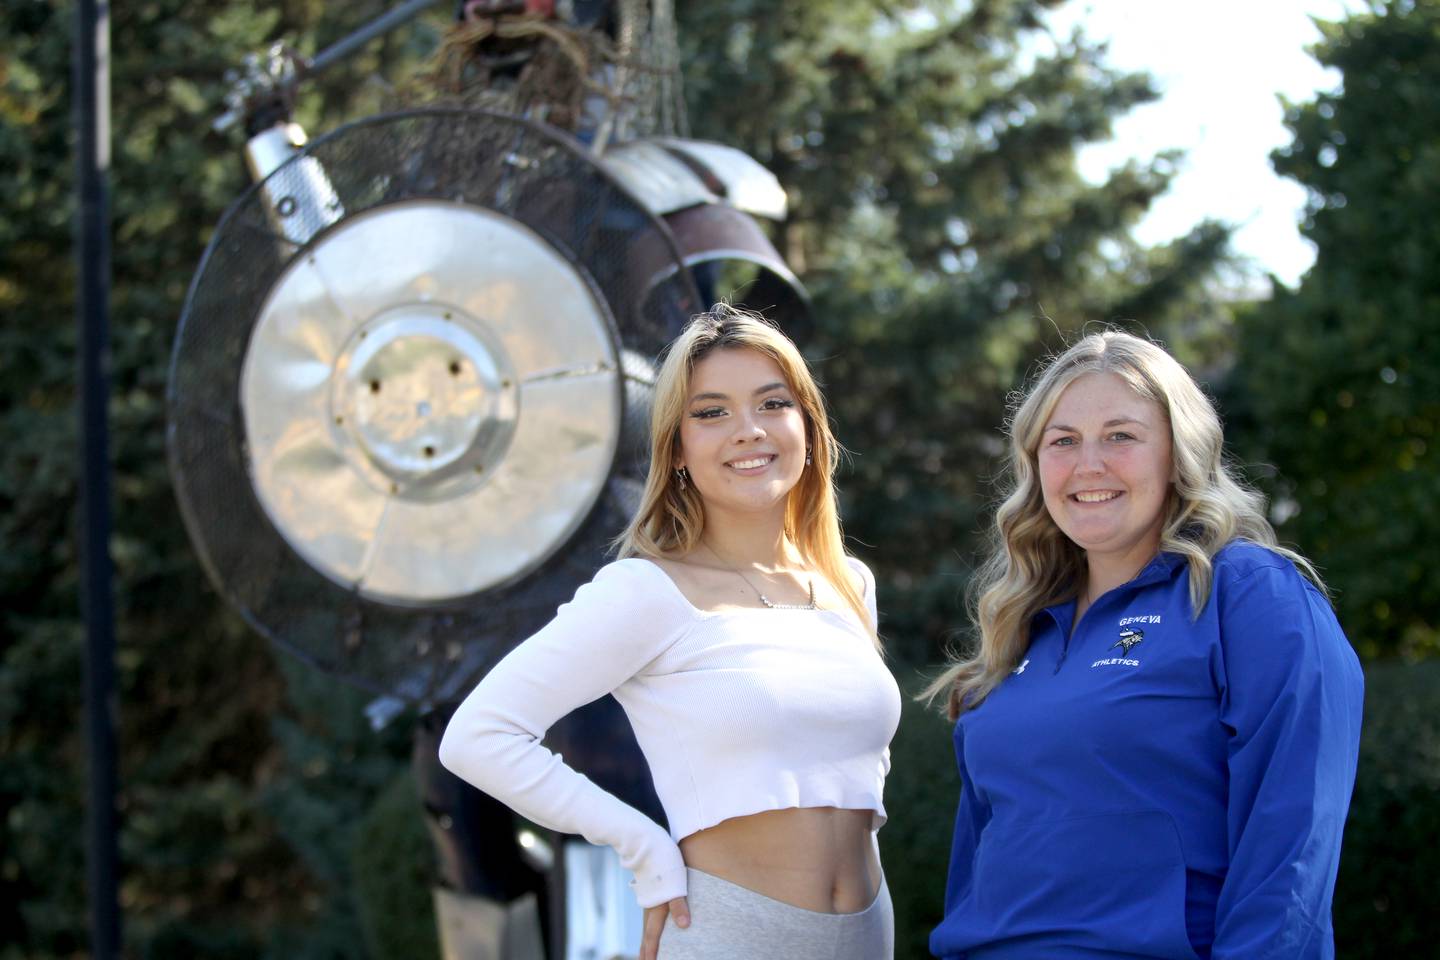 Geneva High School senior Bridget Archbold (left) suffered a medical event during the school’s homecoming dance and was revived by Nicole Collins, a certified athletic trainer contracted by the district through ATI Physical Therapy.